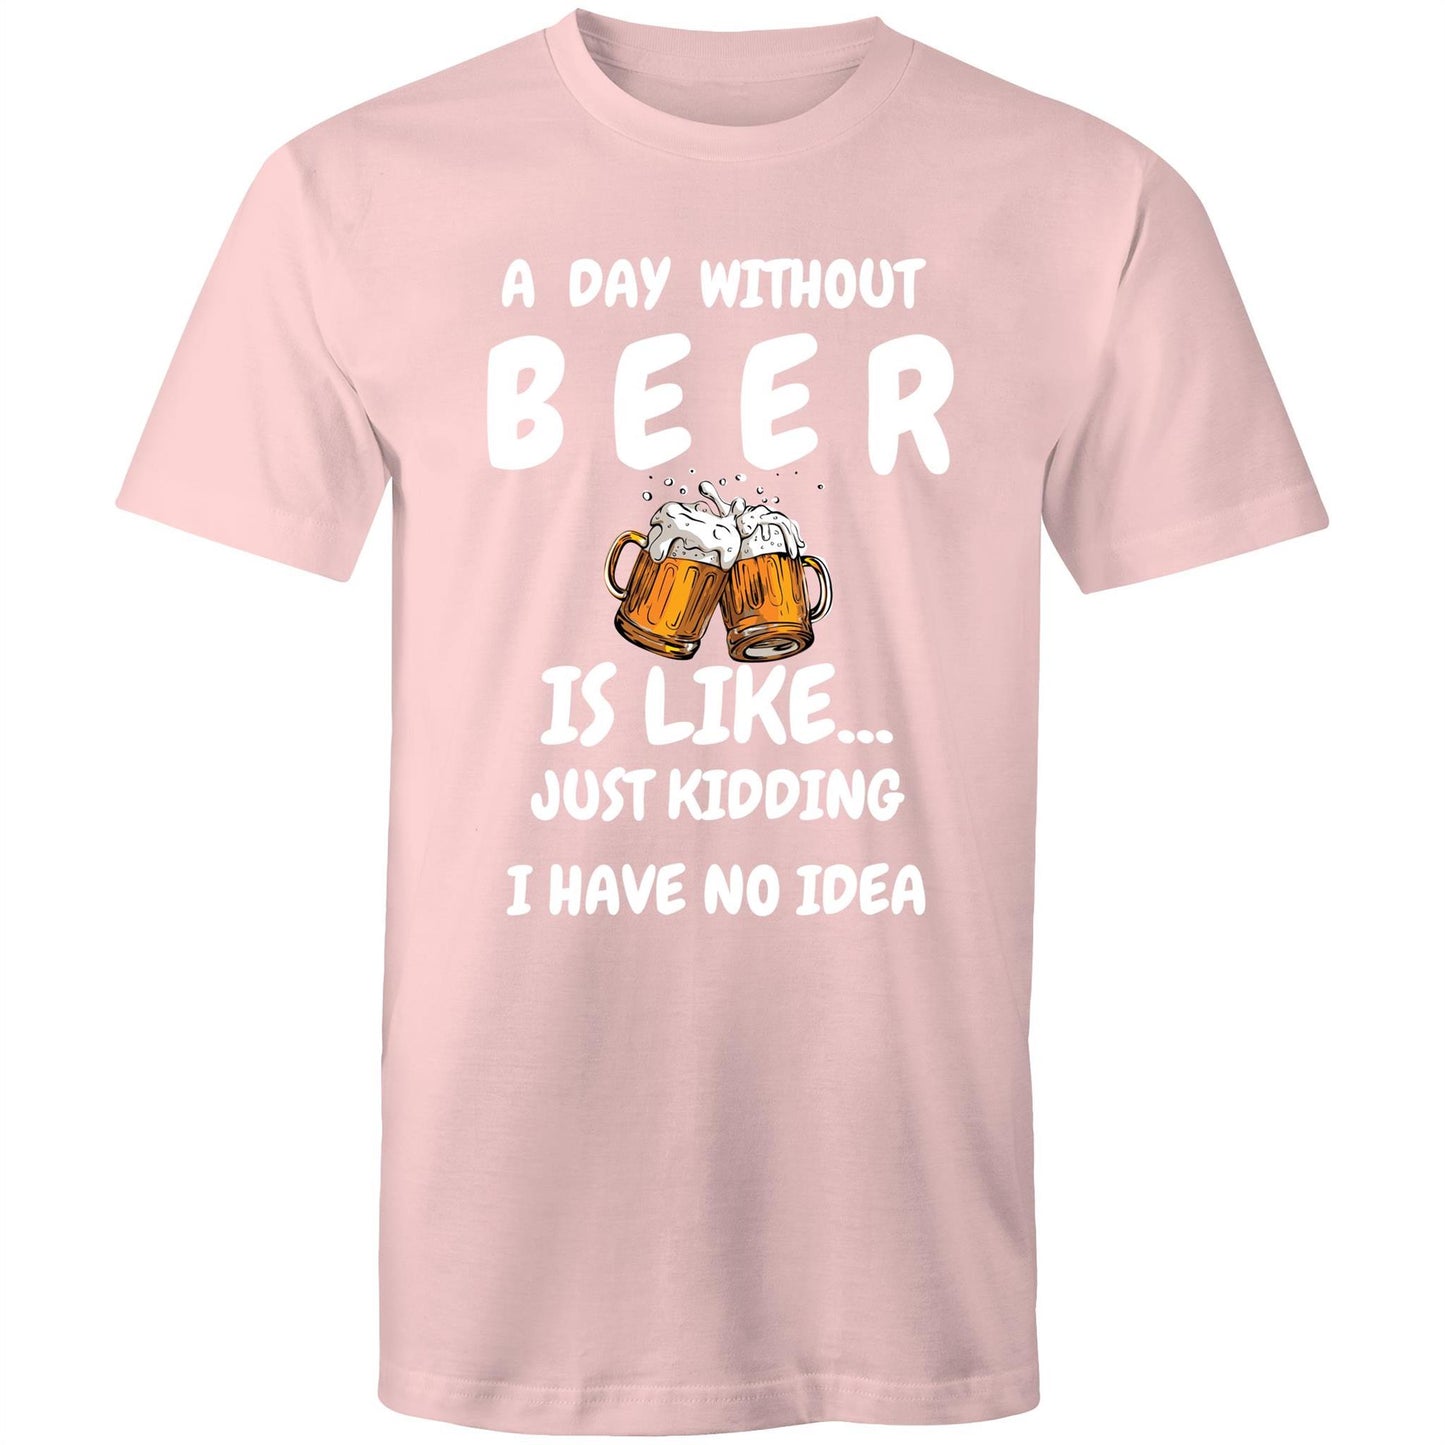 A Day Without Beer - Mens T-Shirt